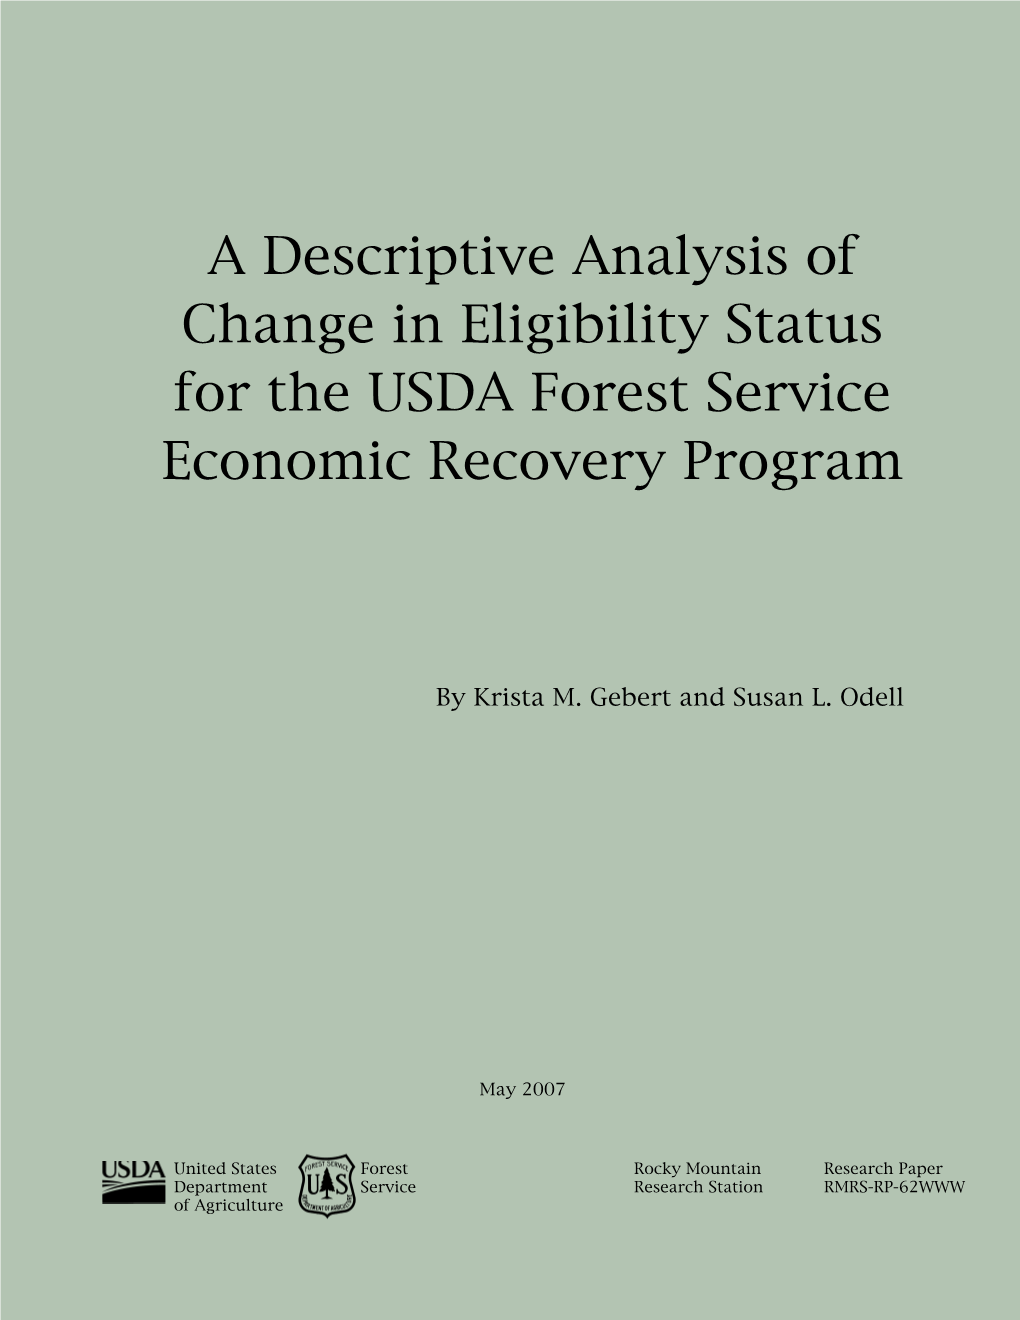 A Descriptive Analysis of Change in Eligibility Status for the USDA Forest Service Economic Recovery Program